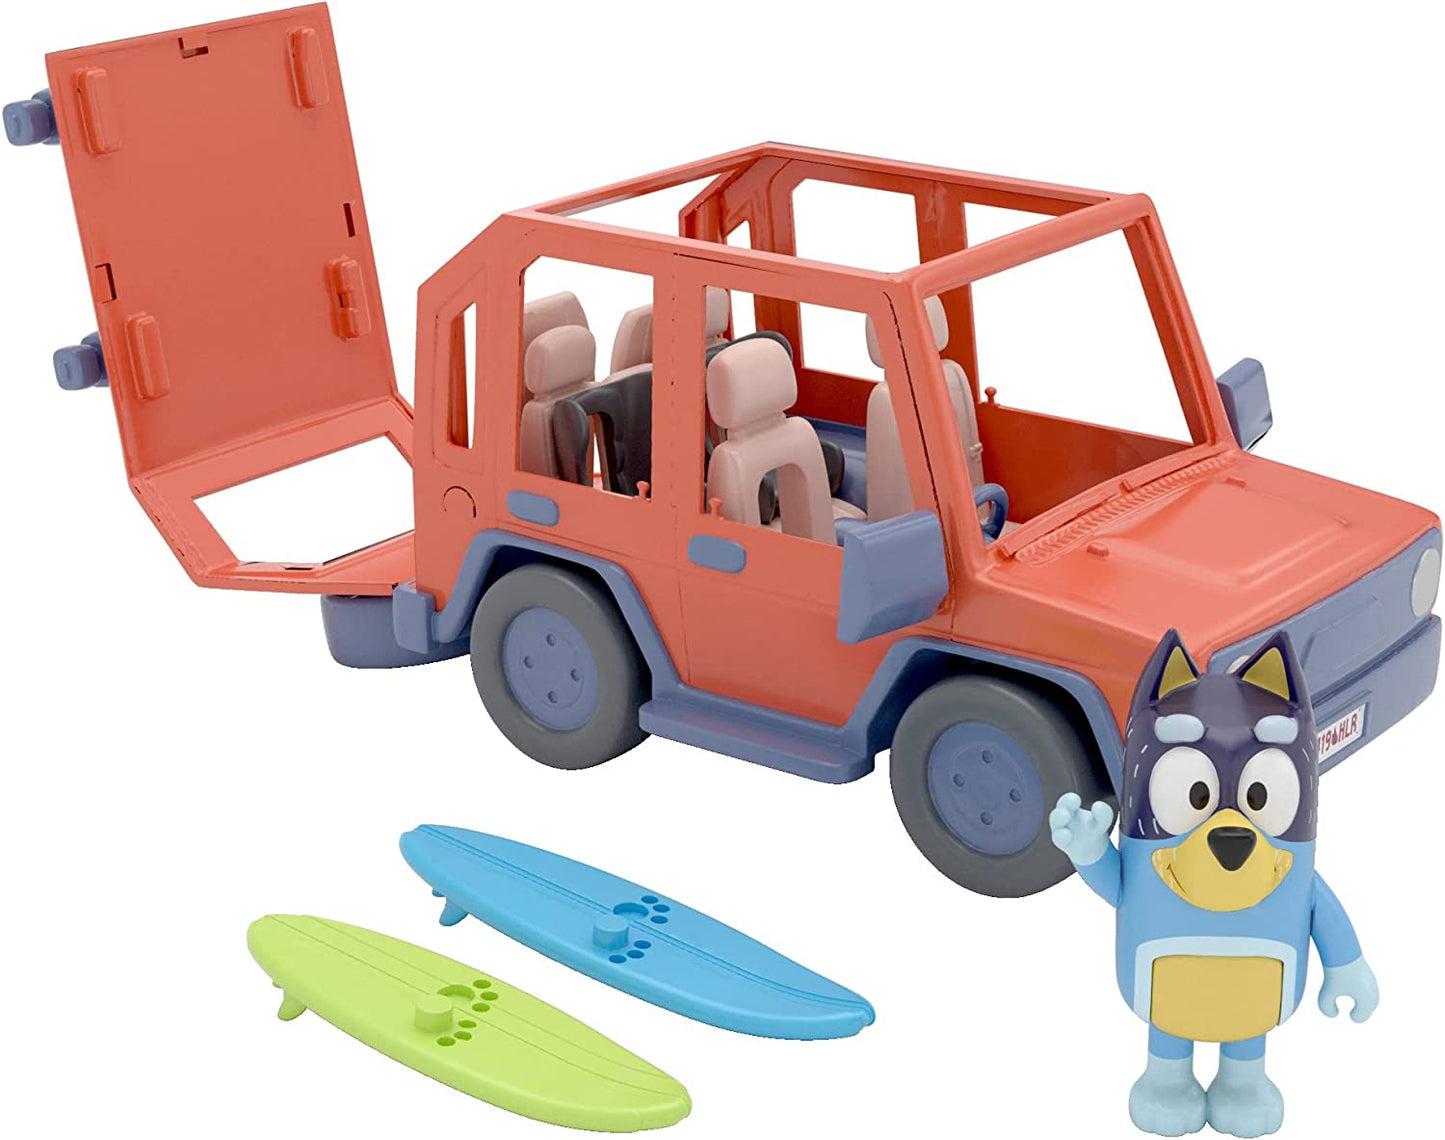 Bluey, 4WD Family Vehicle, with 1 Figure and 2 Surfboards | Customizable Car - Adventure Time | for Ages 3+, Multicolor